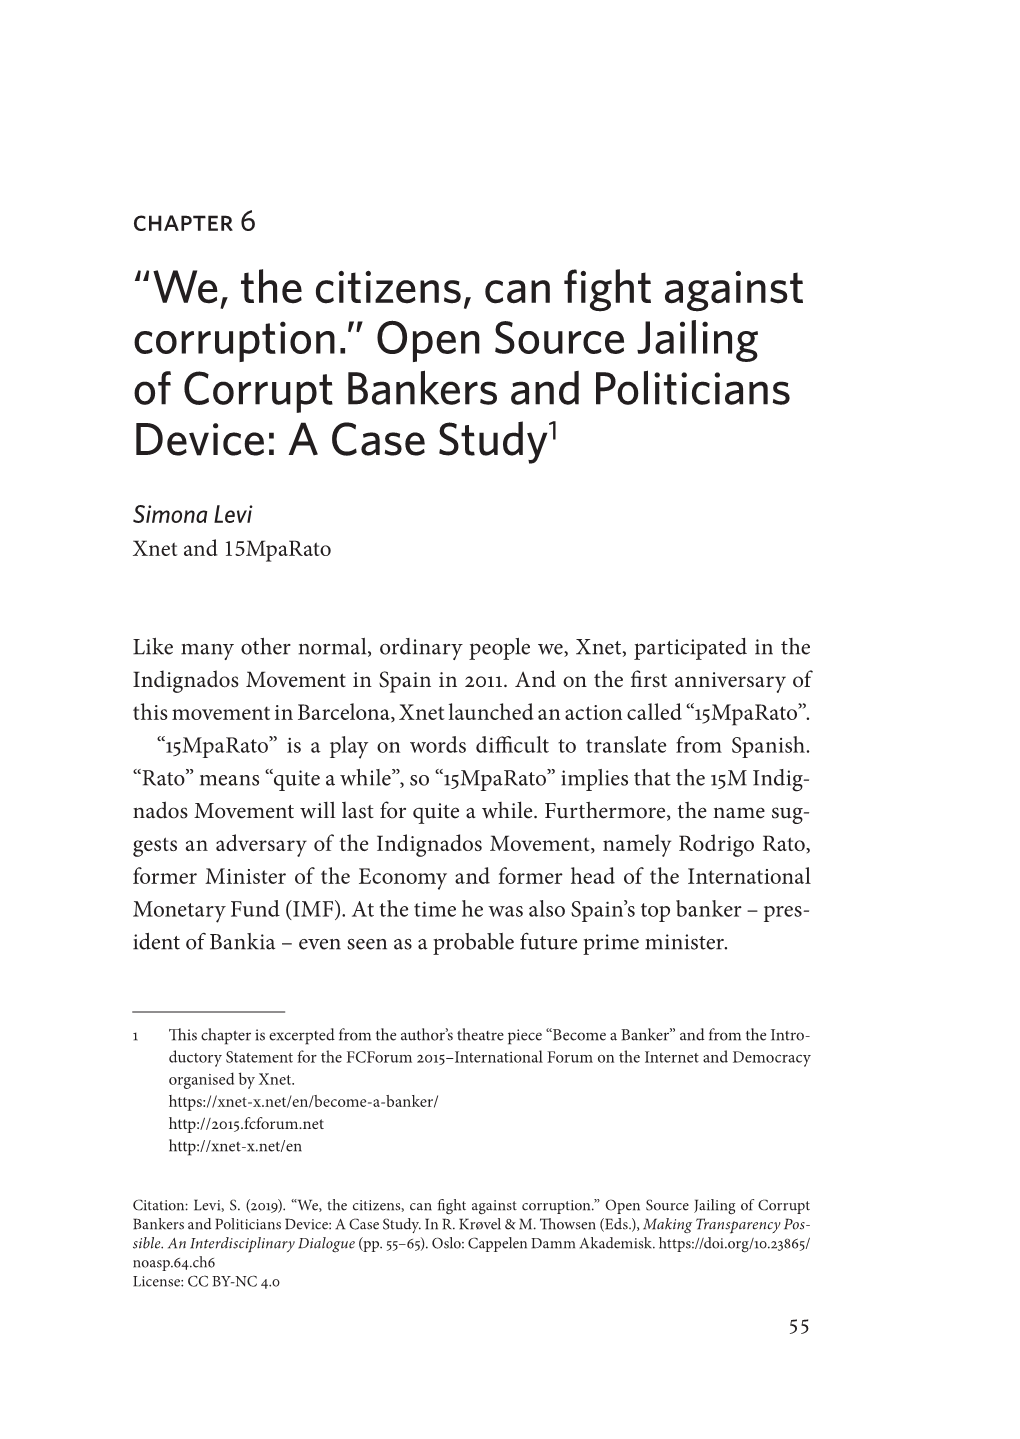 We, the Citizens, Can Fight Against Corruption.” Open Source Jailing of Corrupt Bankers and Politicians Device: a Case Study1